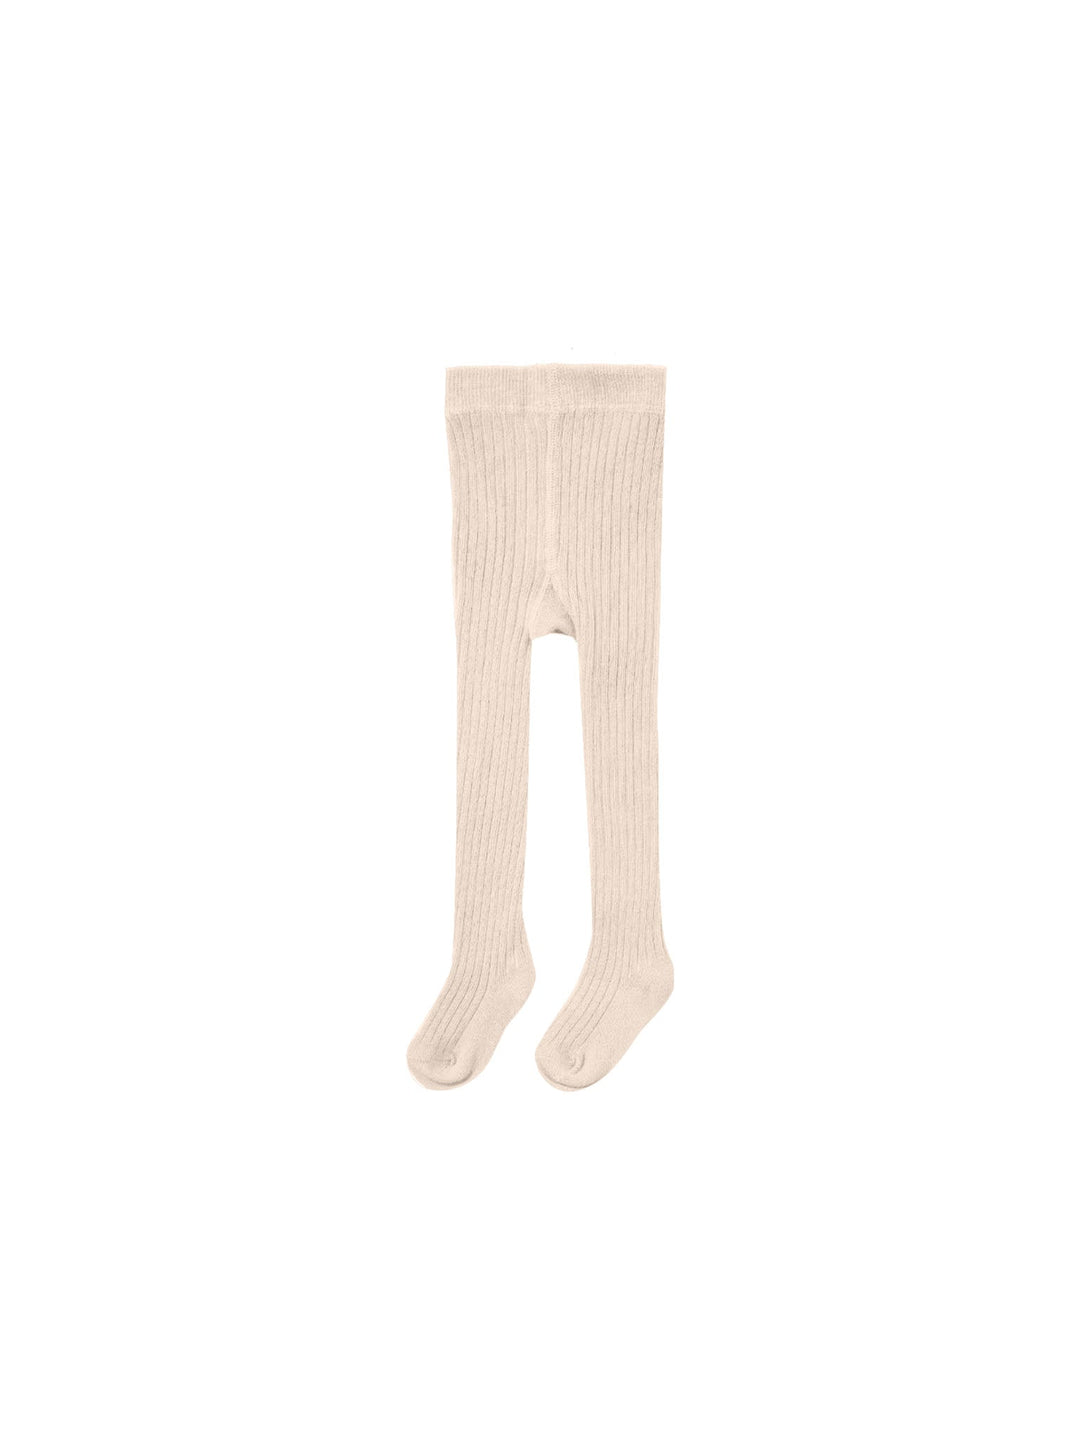 Quincy Mae Baby & Toddler Socks & Tights Tights - Shell